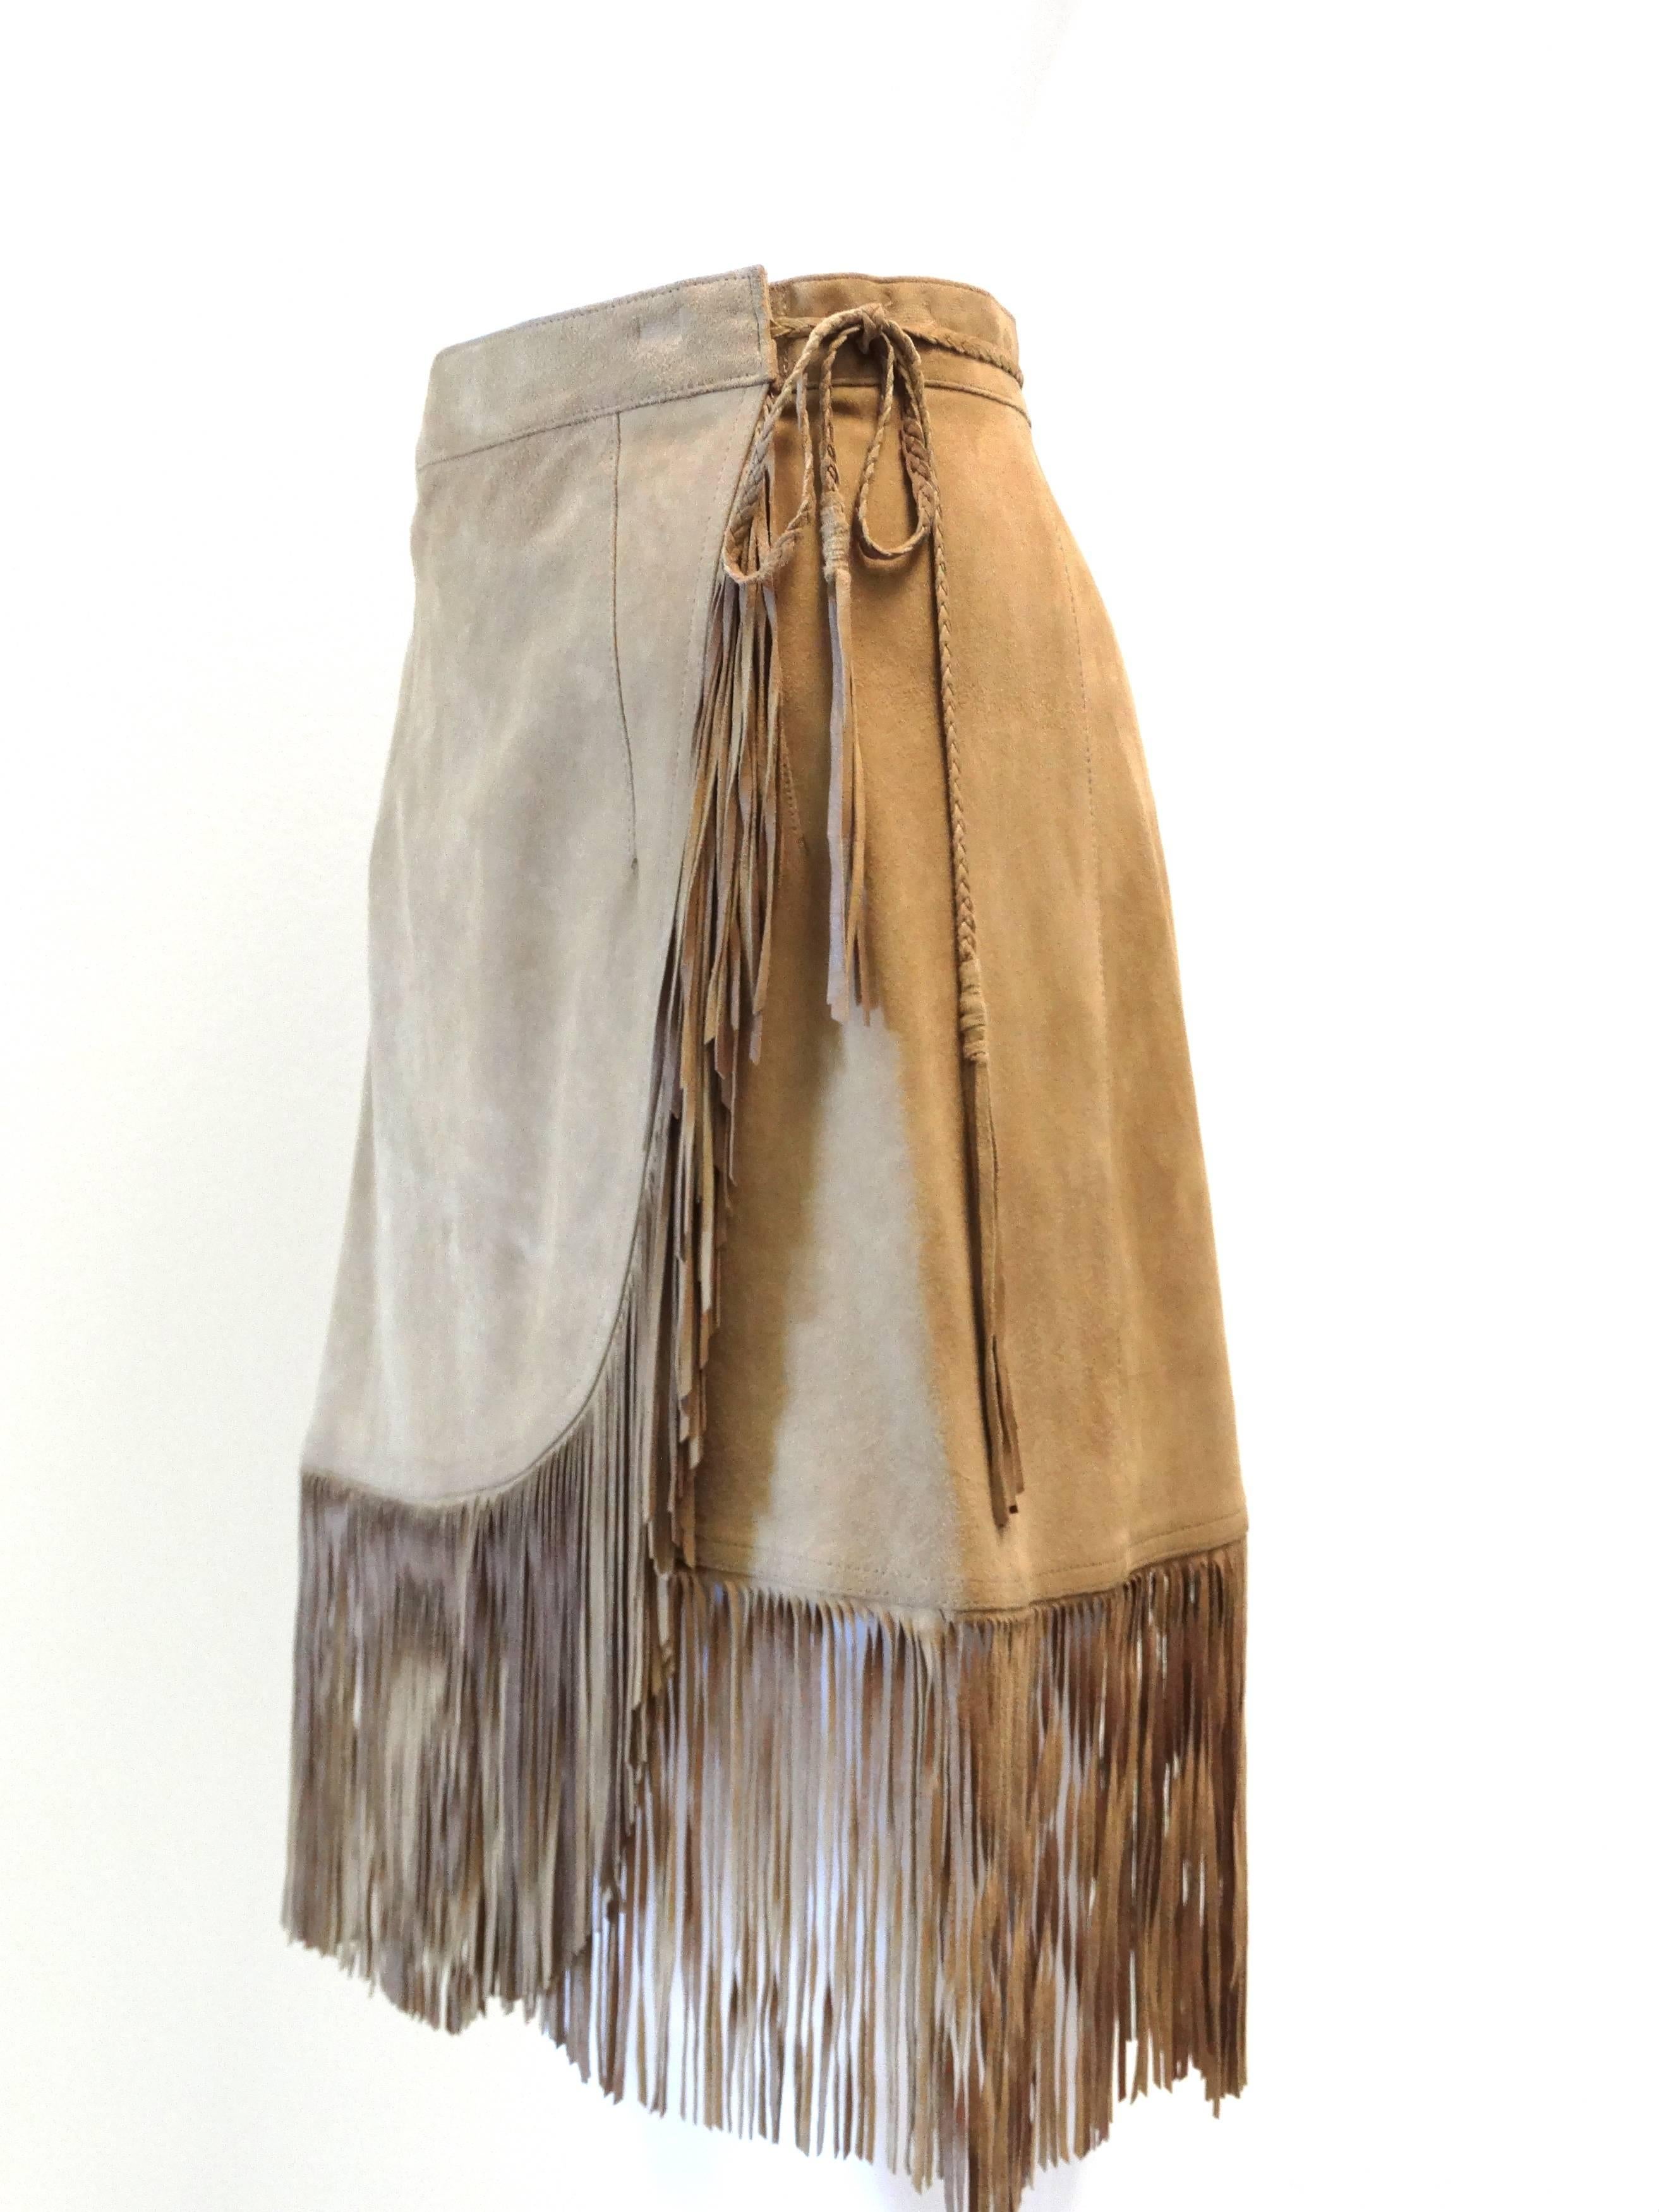 A beautiful fringe skirt designed by Jose'Luis circa 1970's with the softest suede. Skirt wraps around you then as a small hook closure to secure at the side. Also has a small braided tie that wraps around the back to tie at the side. Marked a size